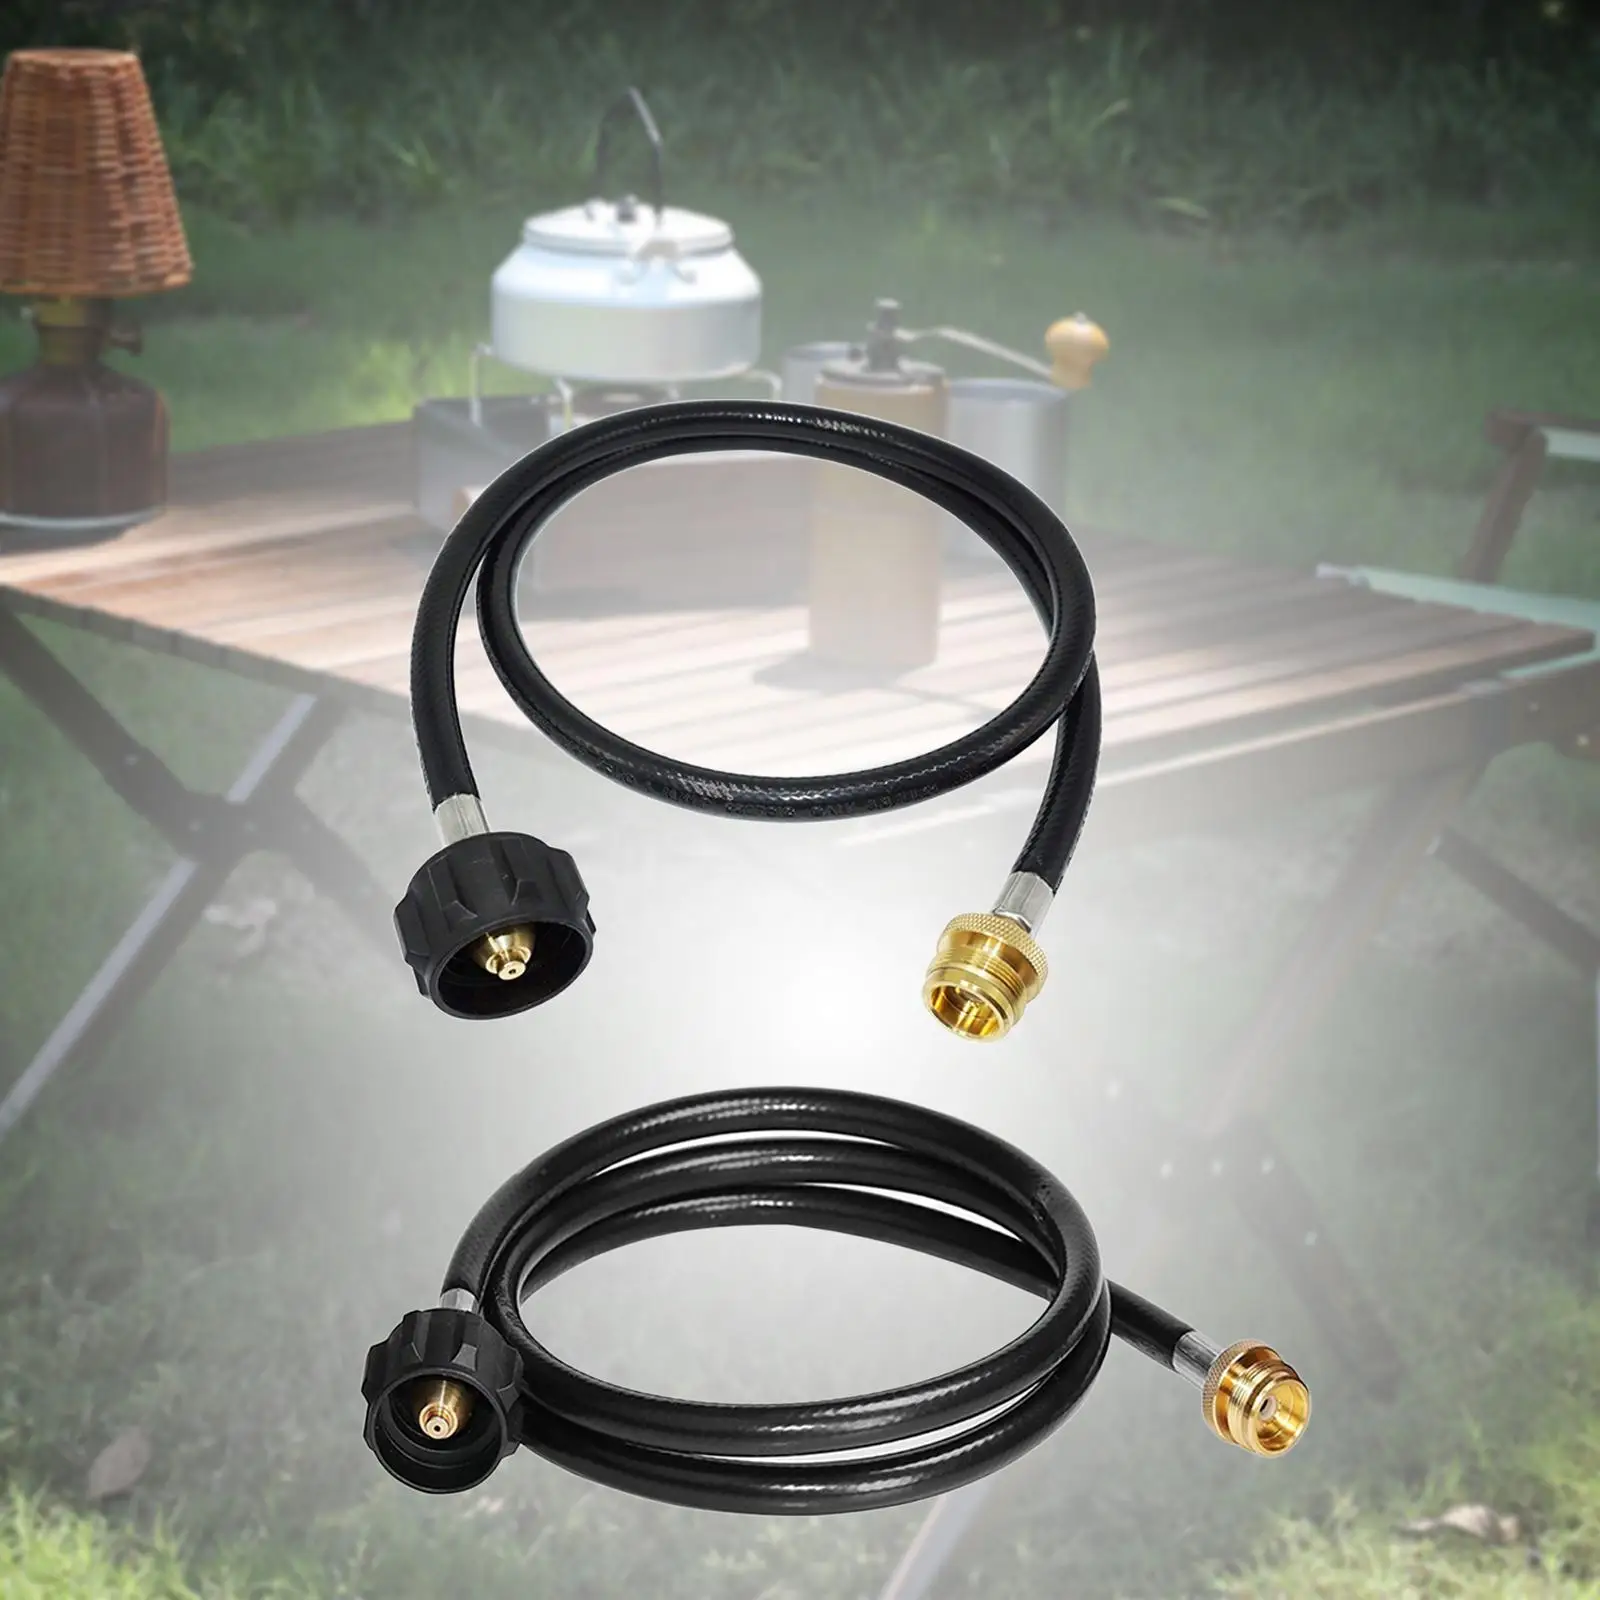 Propane Adapter with Hose Propane Tank Hose Replace Cooking Parts Portable